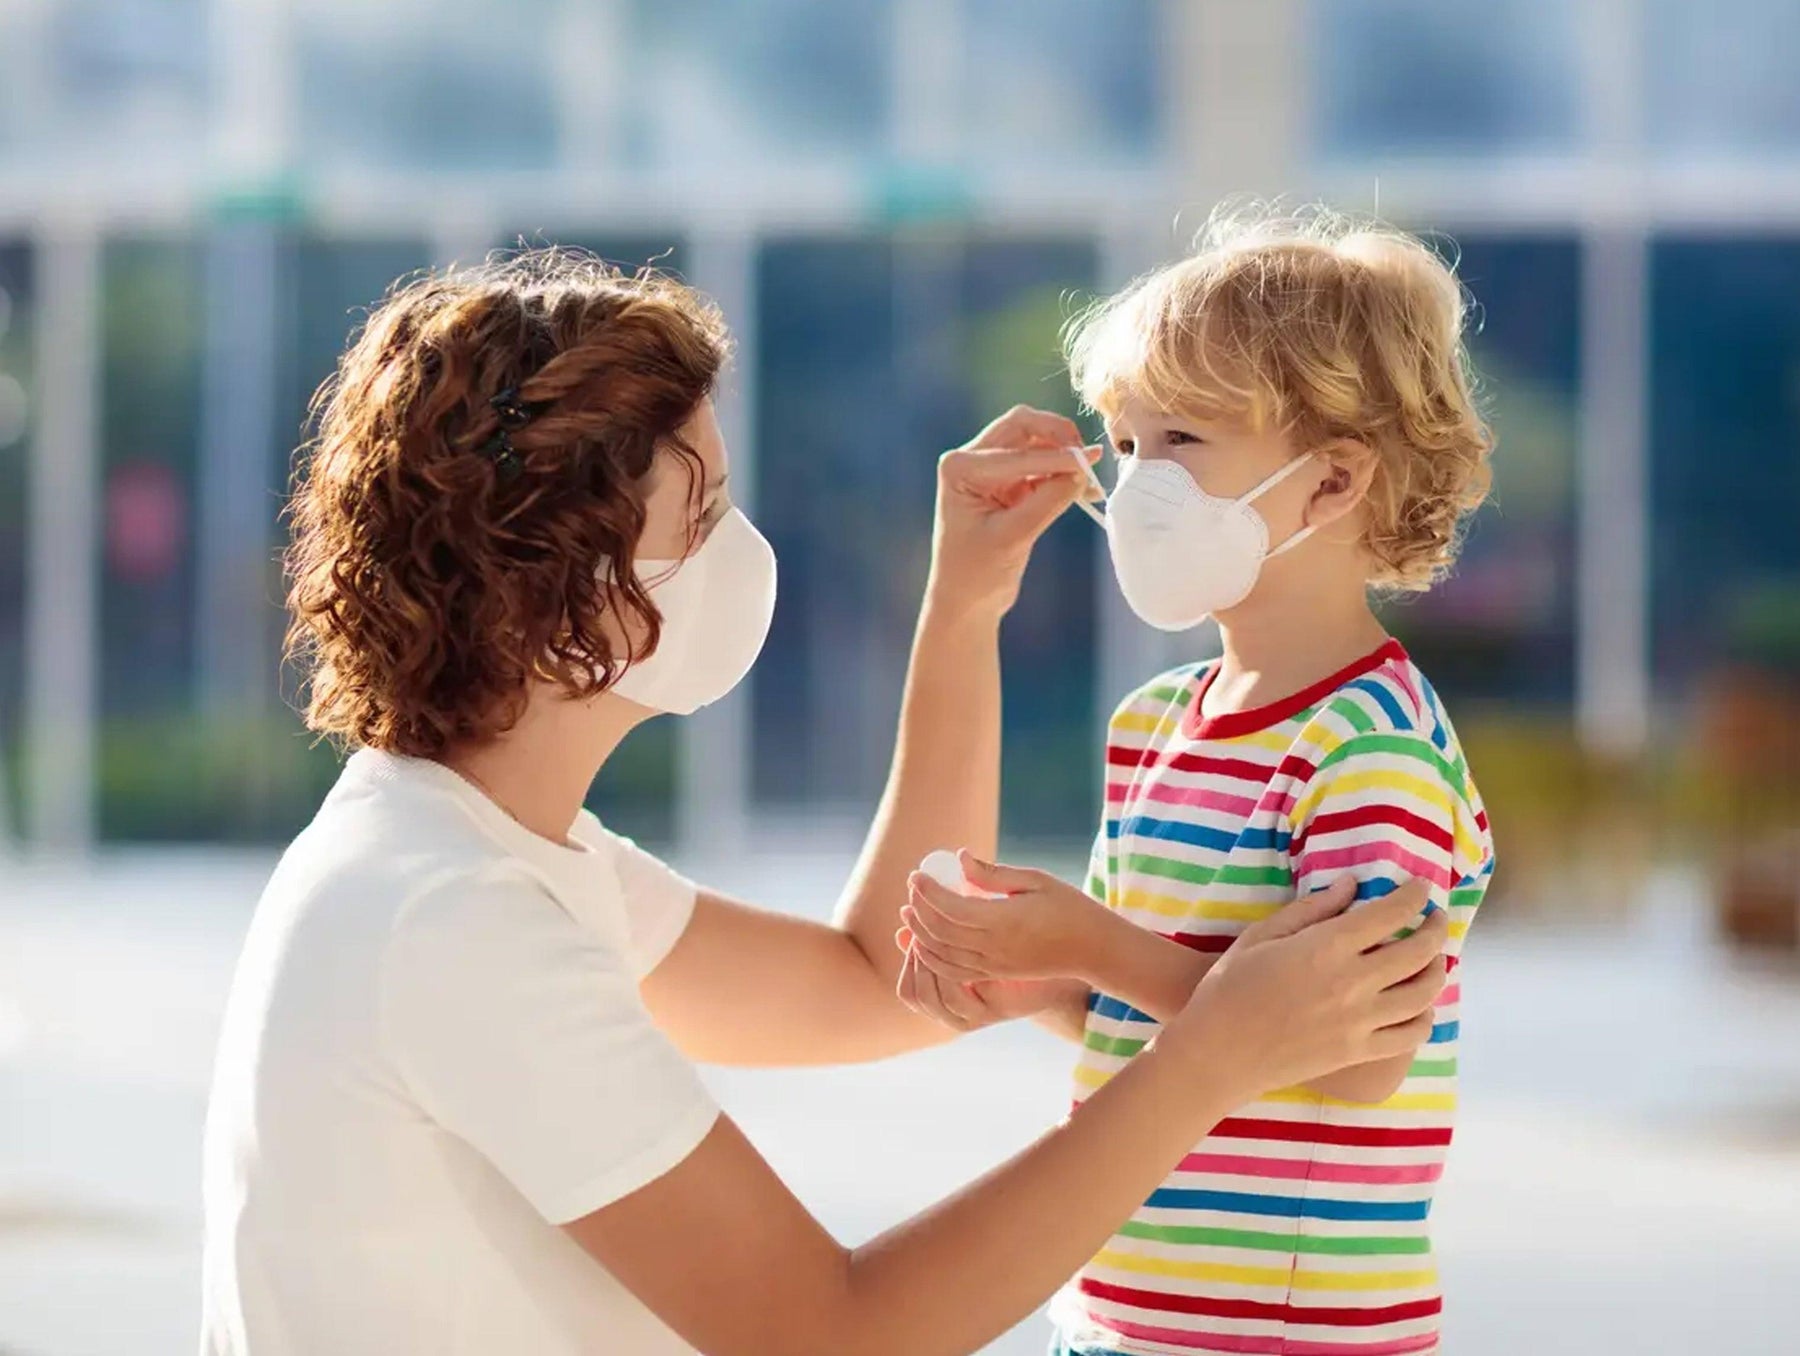 How To Motivate Your Kids To Wear Face Masks During The COVID 19 Pandemic